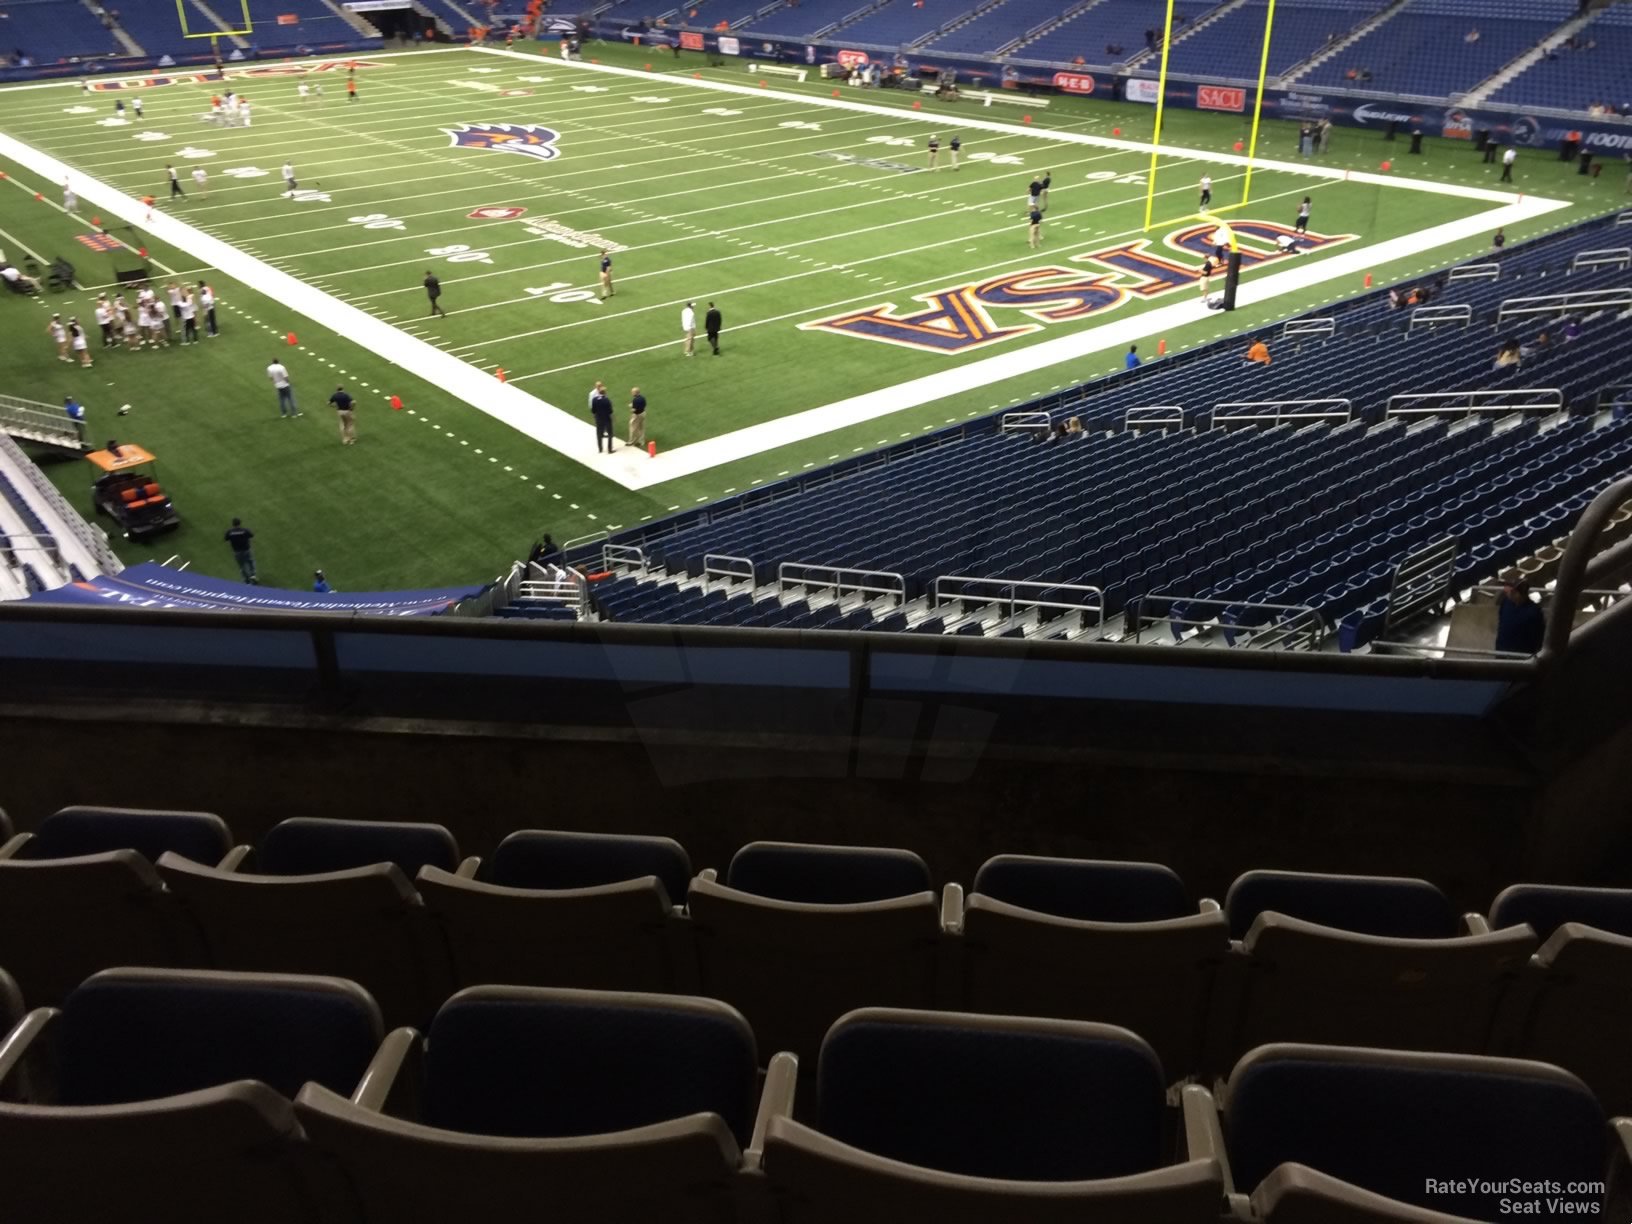 section 205, row 5 seat view  for football - alamodome